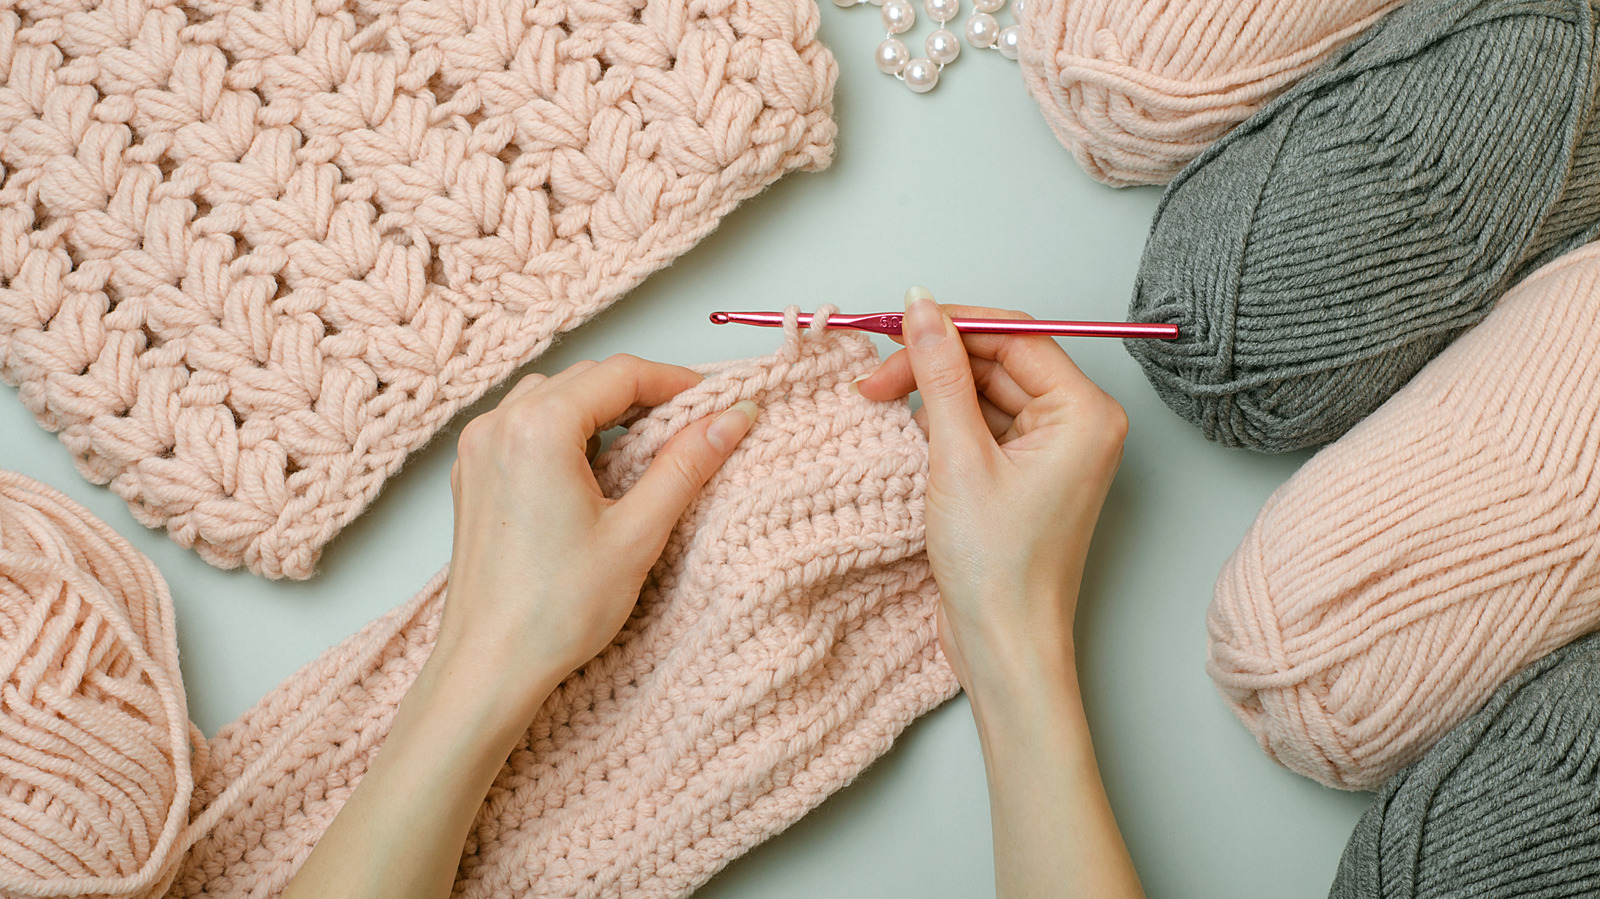 Why Knitting And Crocheting Are Great Activities For Your Mental